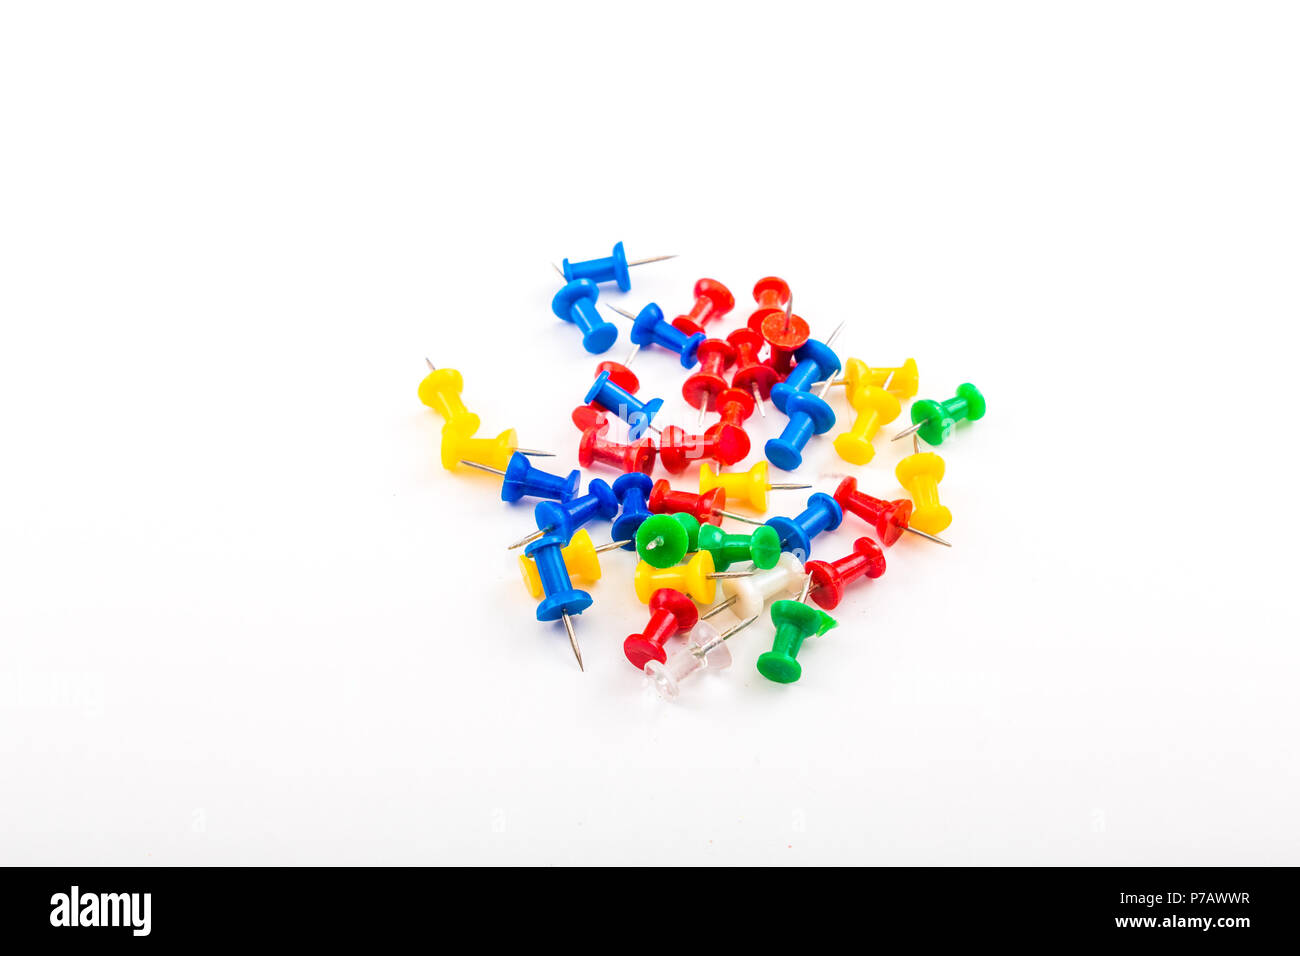 Colorful Pushpins or Thumb tacks on a White Background Stock Photo